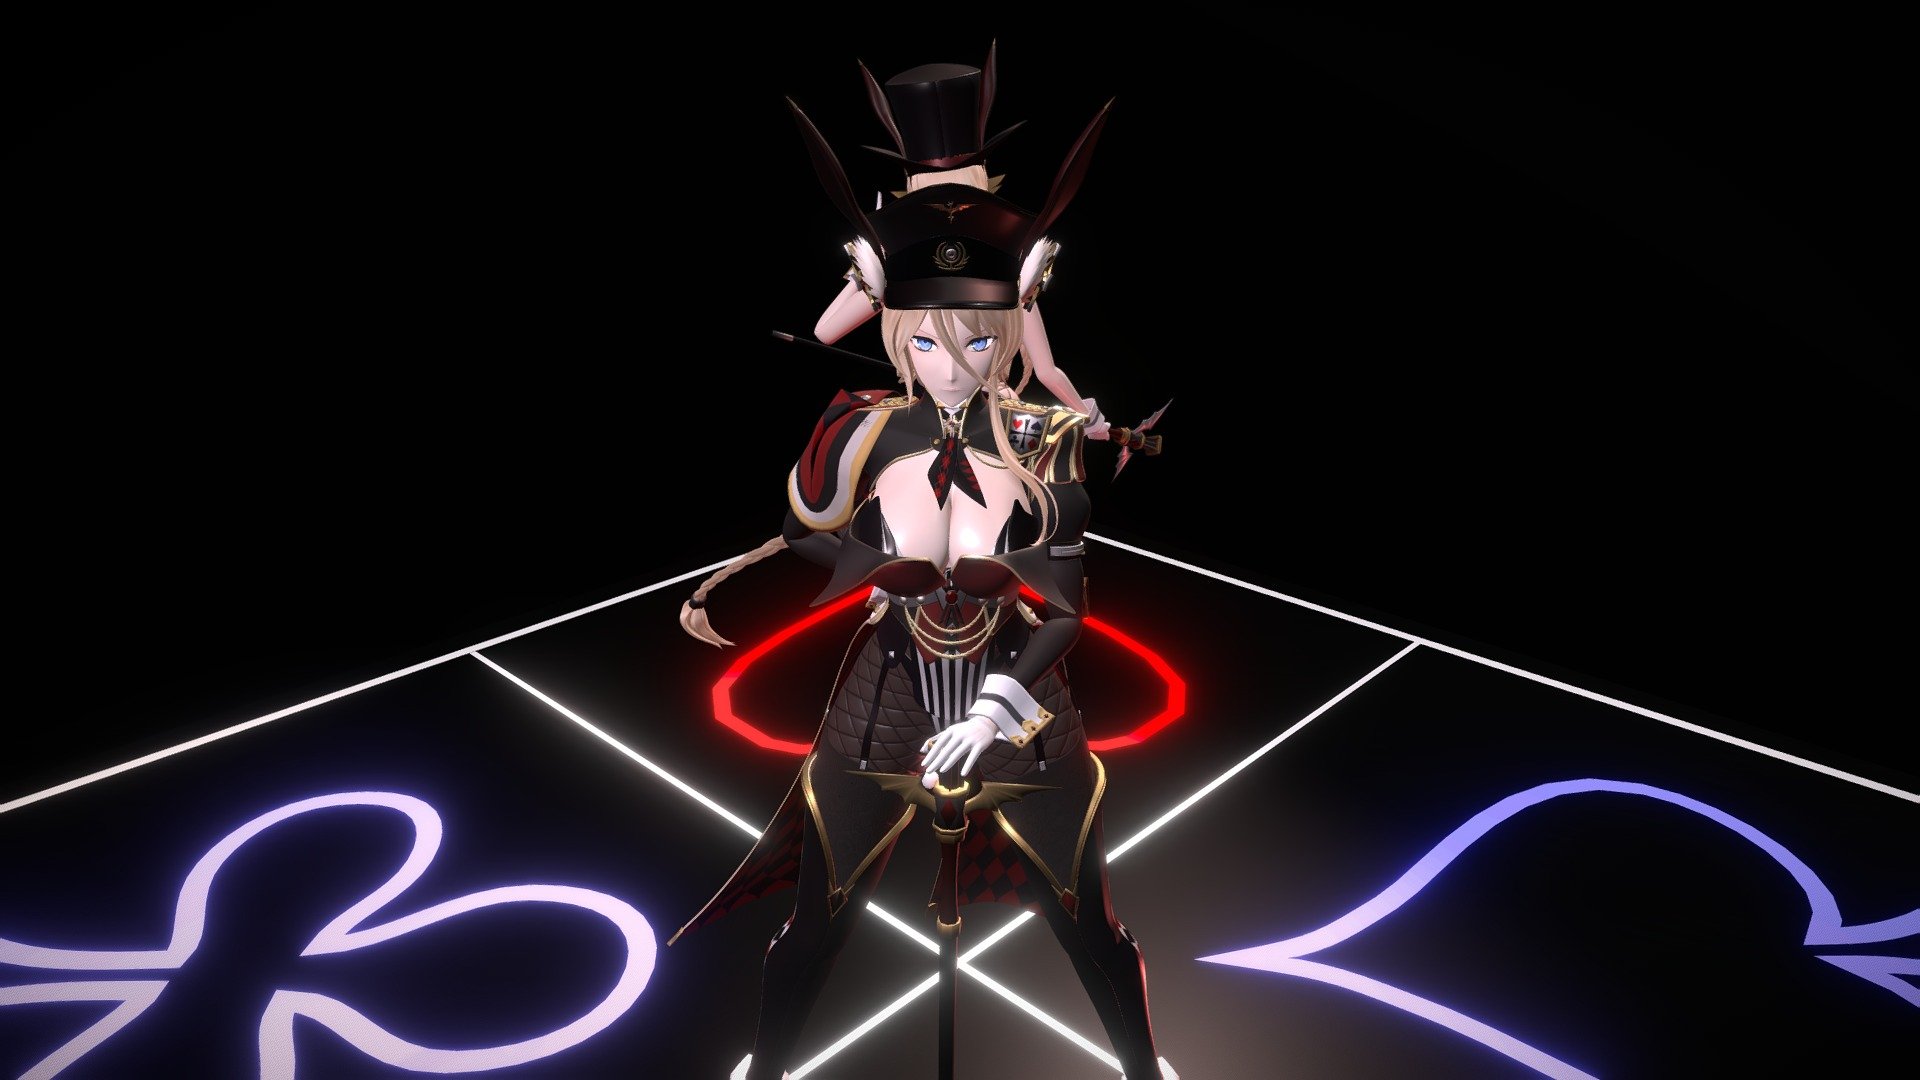 Second piece from the line of custom bunny suits from Godless R&amp;D, this time outfitted for Bismarck of Azur Lane.

Demo: https://youtu.be/VN5Zqt3QYZI - King of Diamonds - 3D model by Godless Laboratories (@noelnoir) 3d model